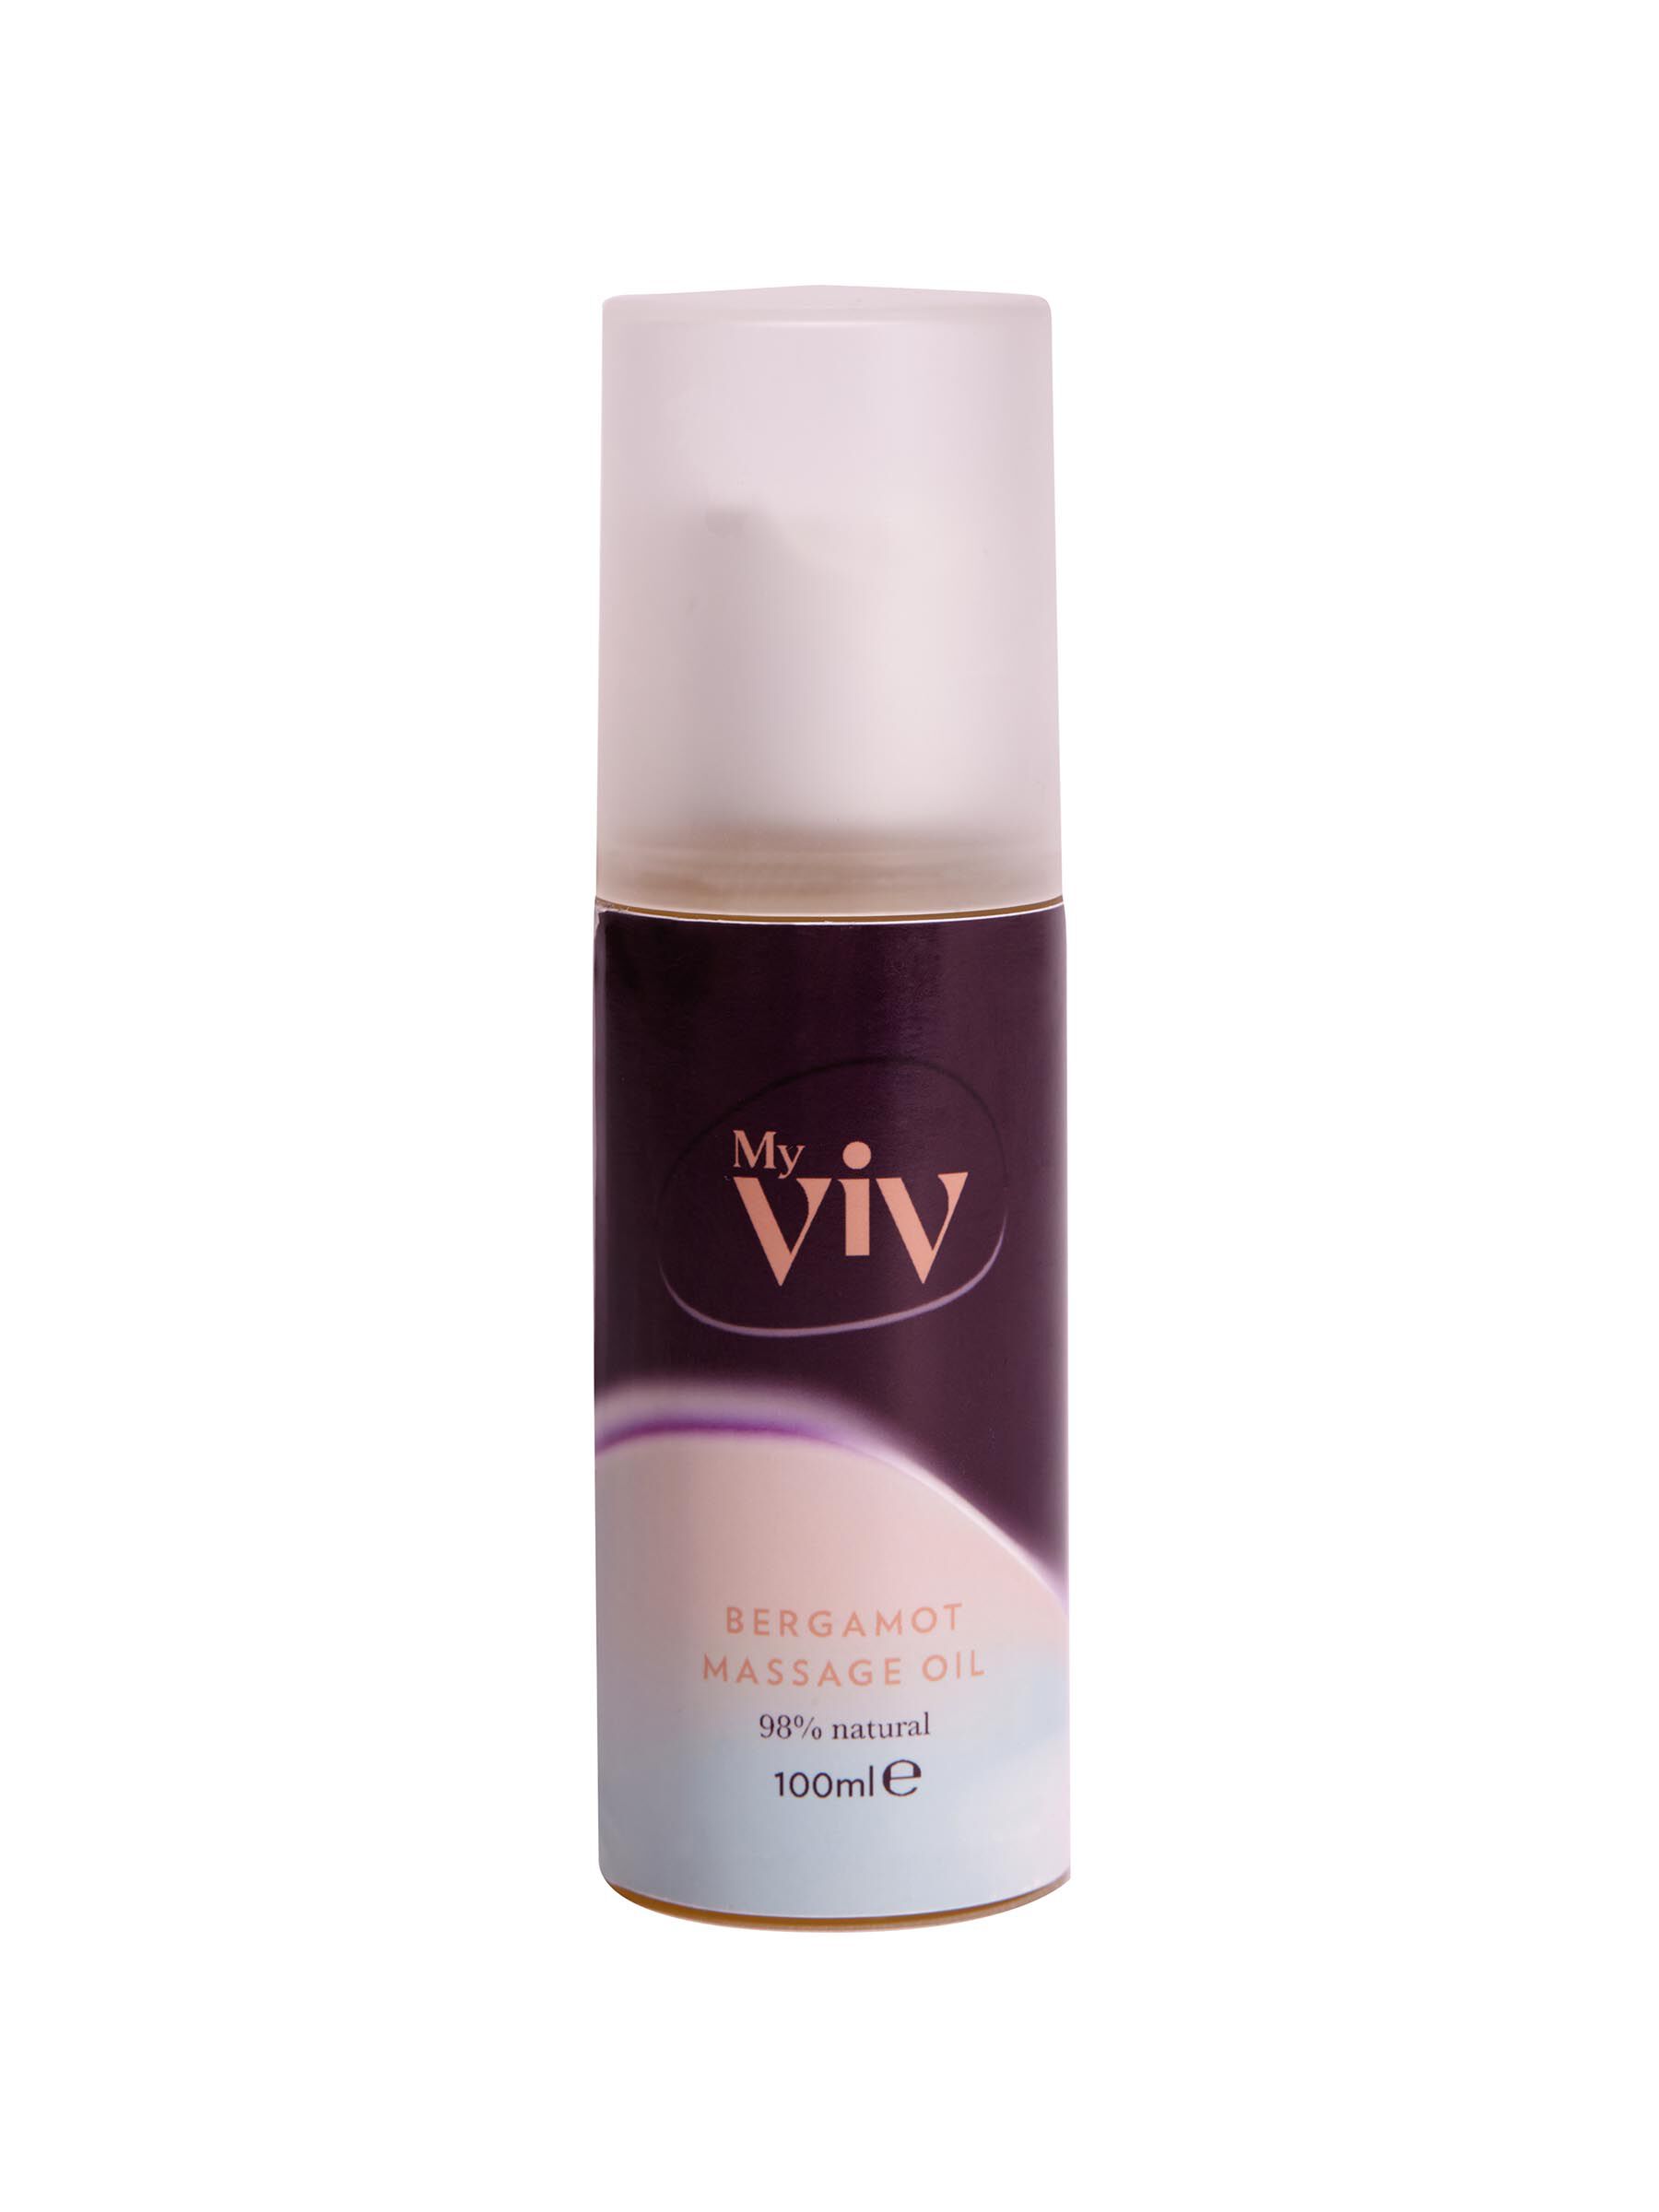 The luxurious, non-greasy yet moisturising My Viv Massage Oil is scented with natural, indulgent Bergamot. You can use yours alone or with your partner for a sensual massage.